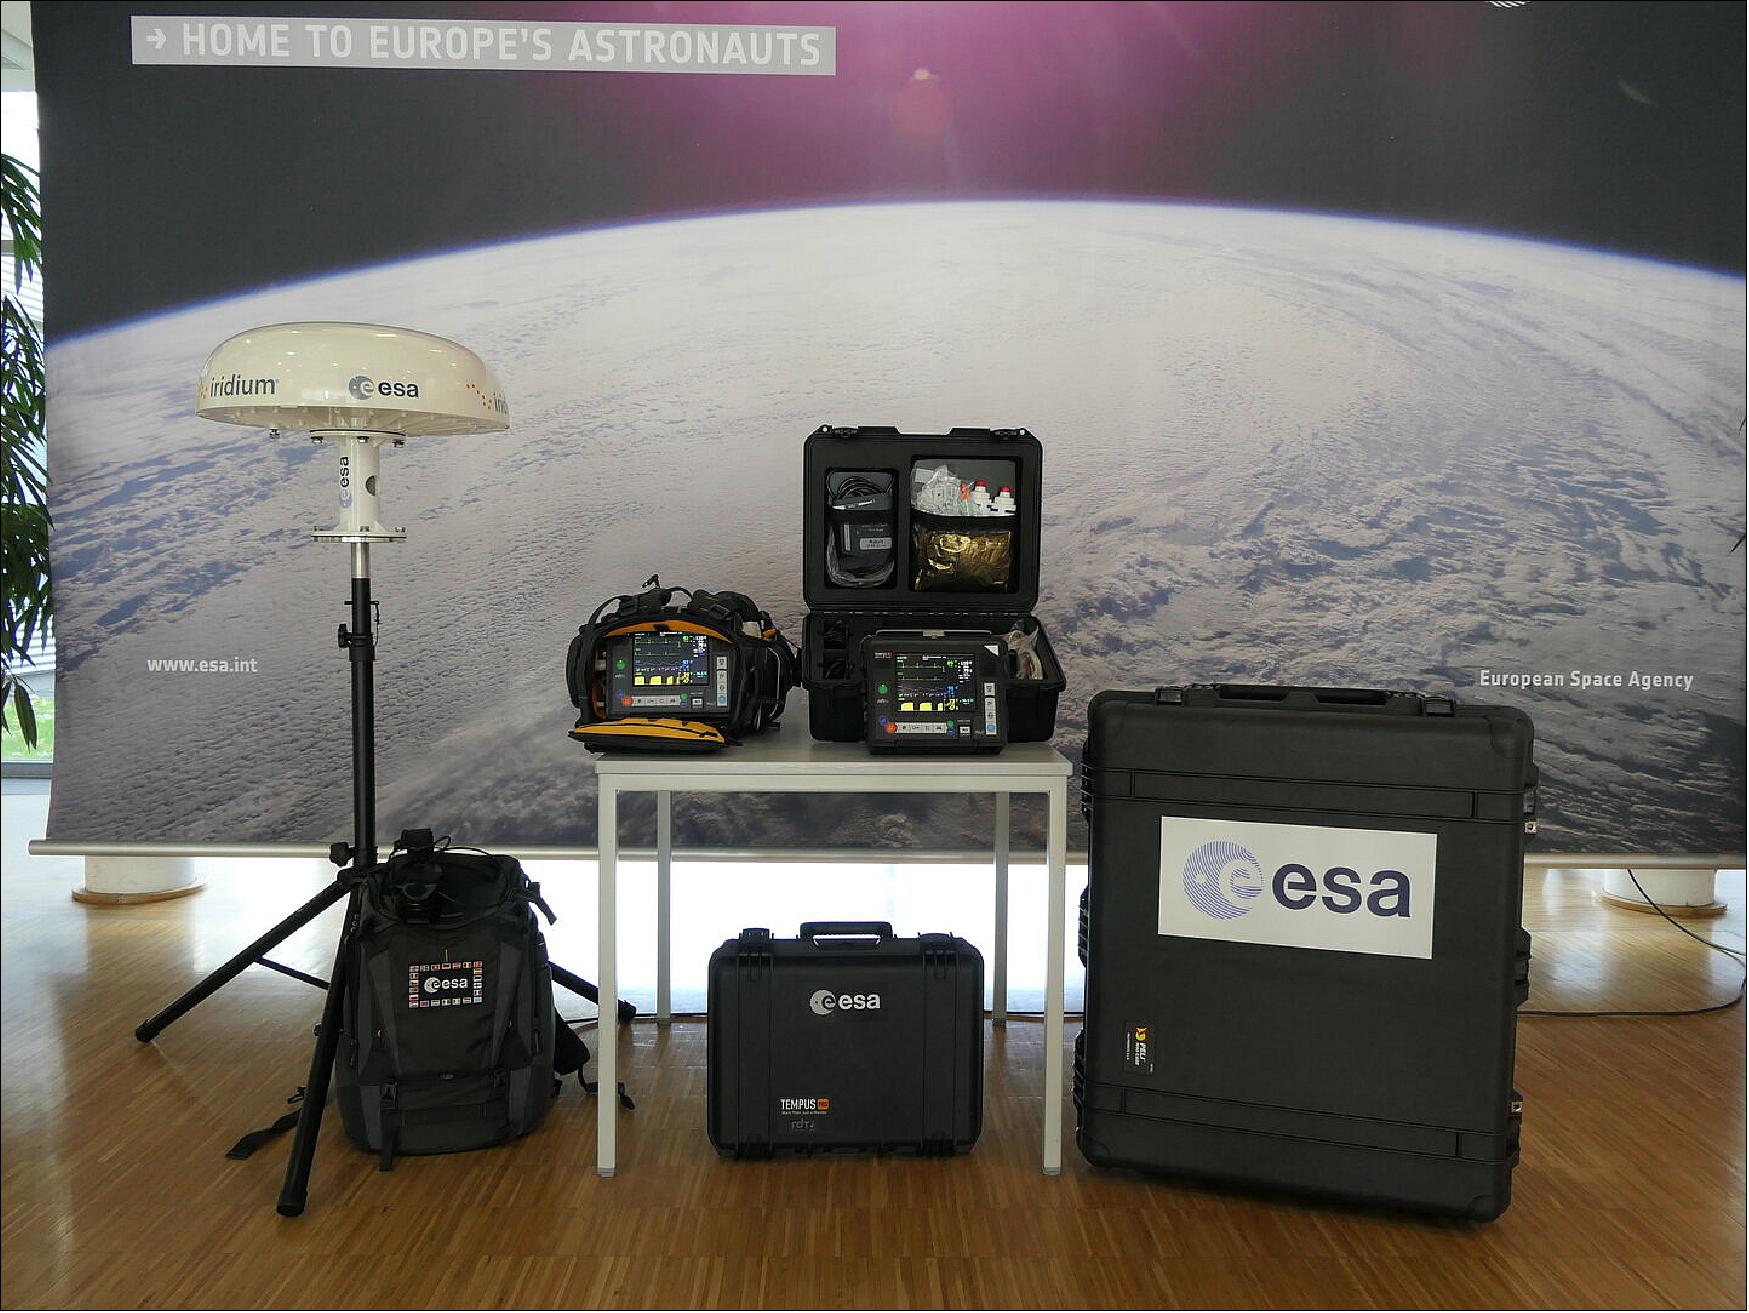 Figure 6: The Tempus Pro telemedicine device, and antenna to connect to the Iridium satellite network that orbits Earth, on display in ESA's astronaut center in Cologne, Germany before being shipped to Argentina for transfer to Argentinian Antarctic bases. Tempus Pro is being tested in the harsh conditions of two Antarctic bases as Europe prepares for the future of human space exploration to the Moon and Mars (photo credit: ESA)